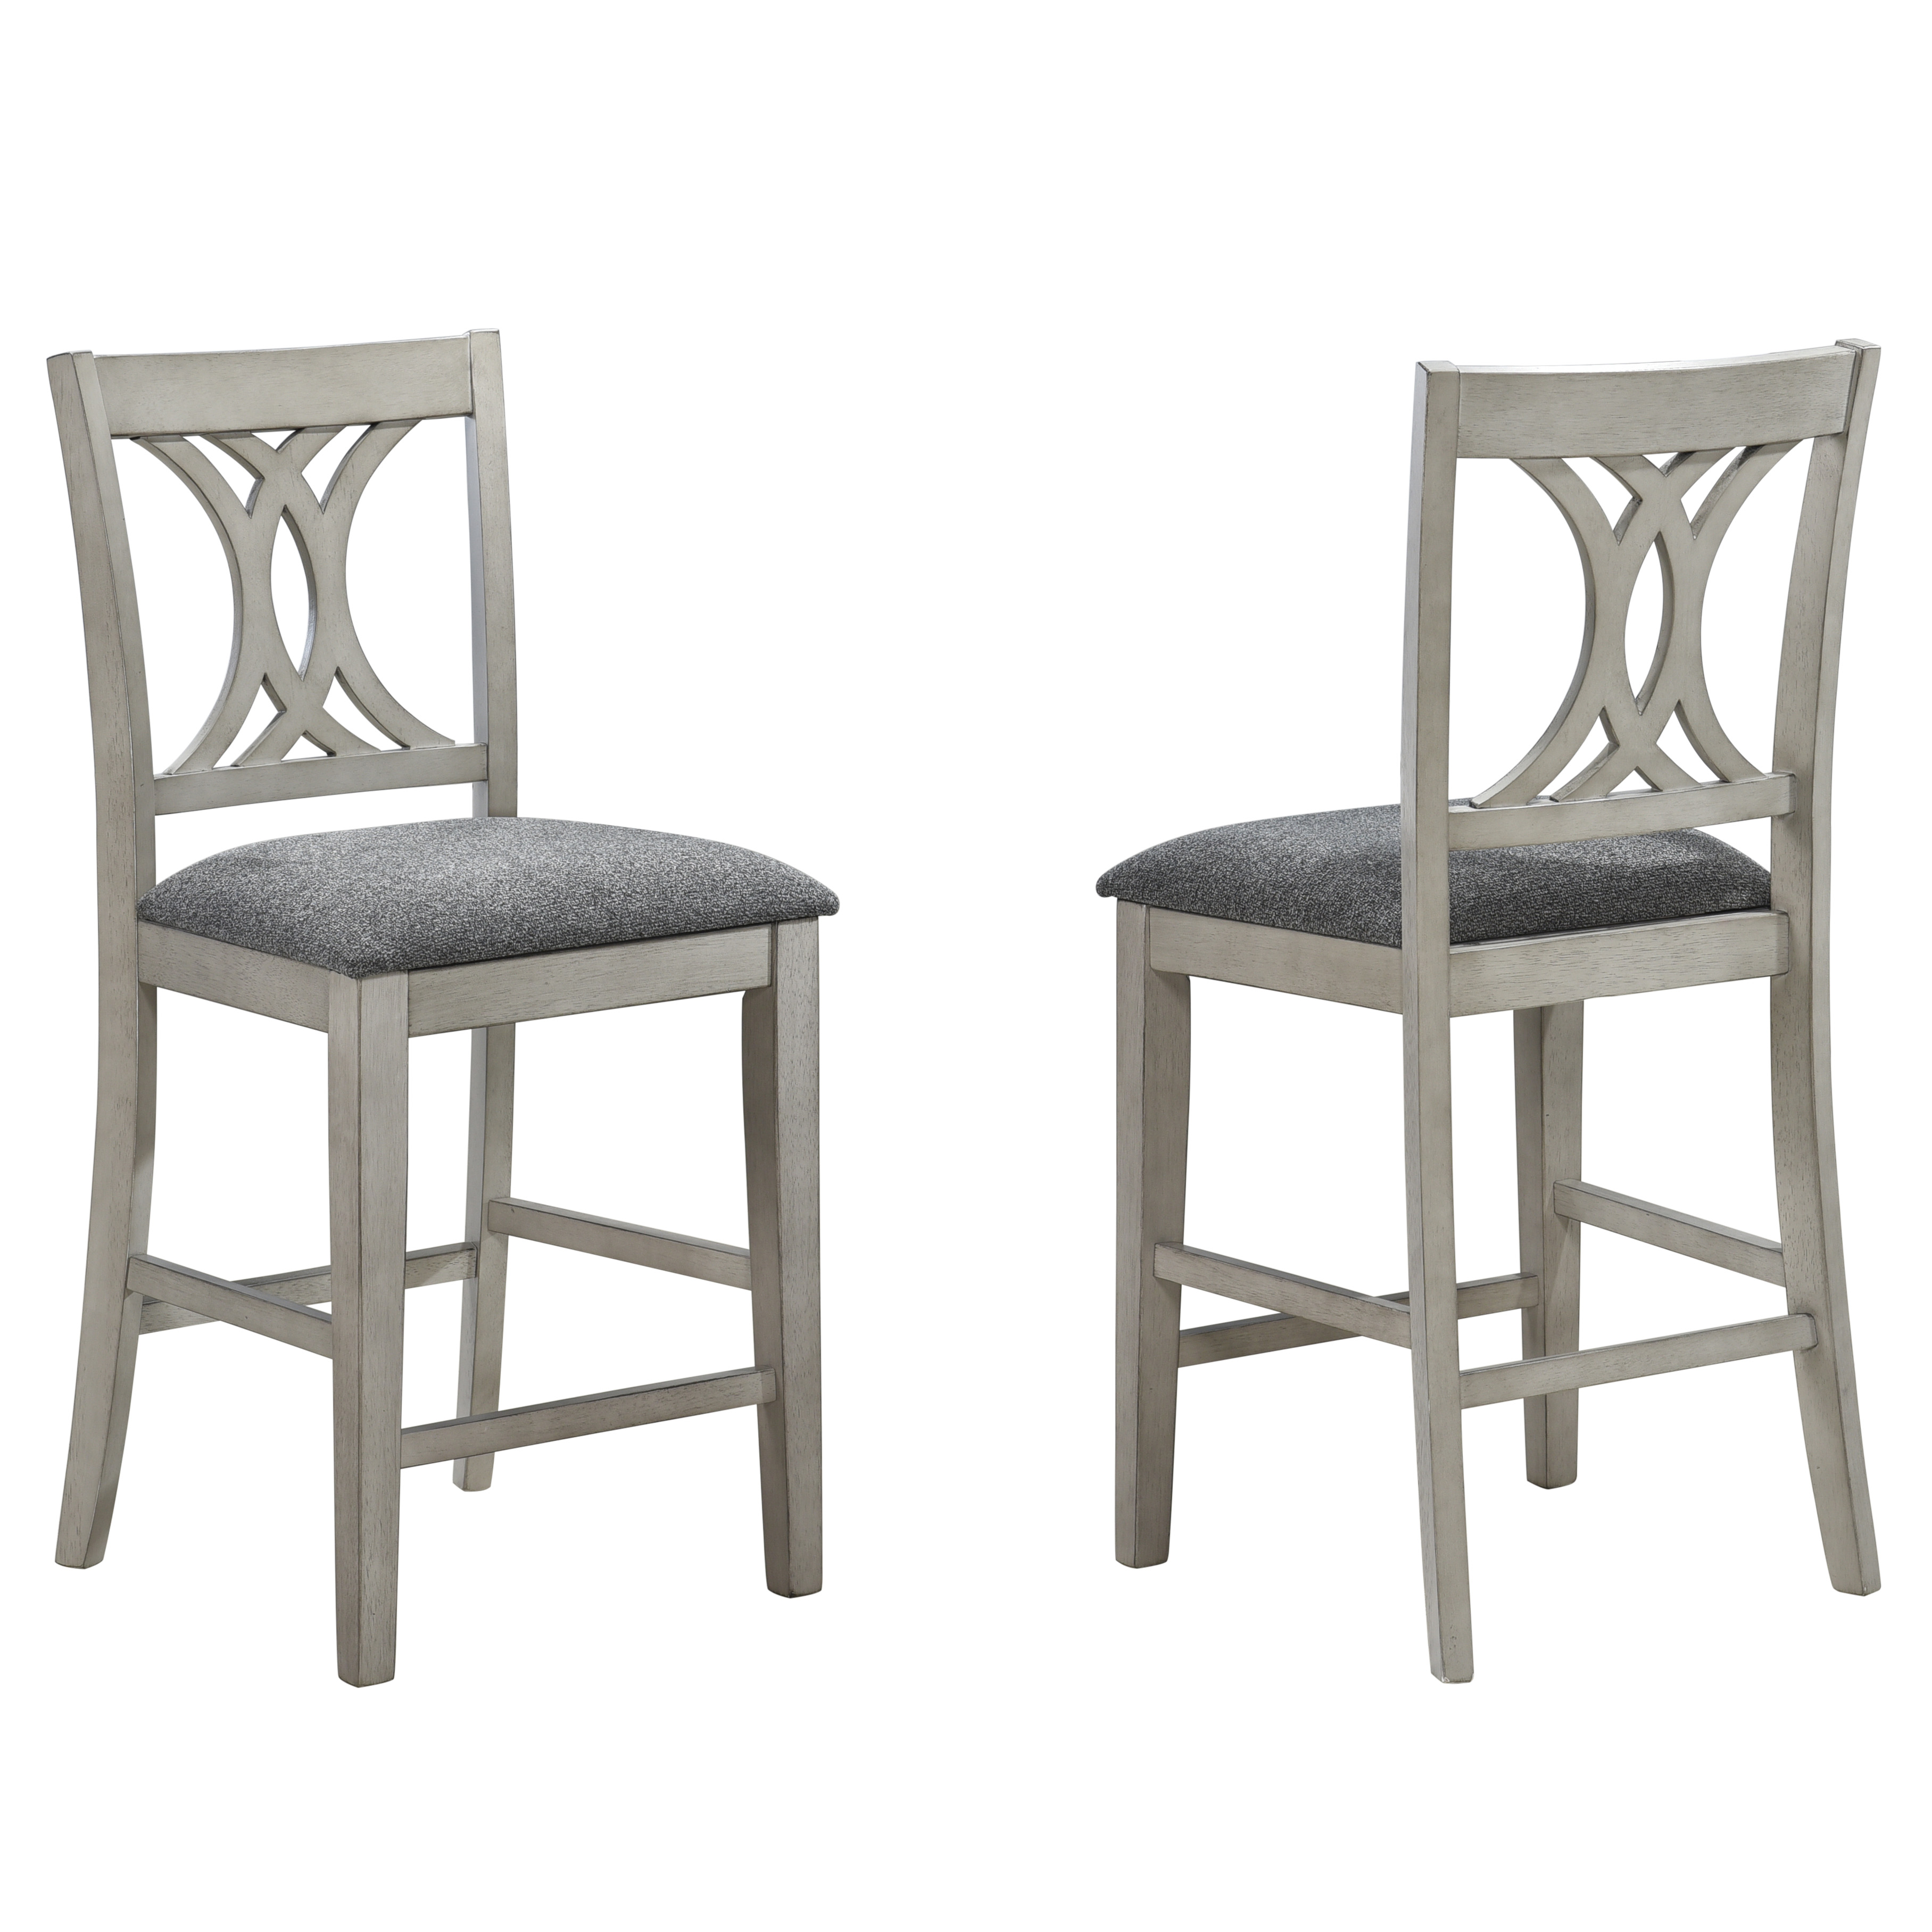 Grayling Counter Height Stool - Set of 2